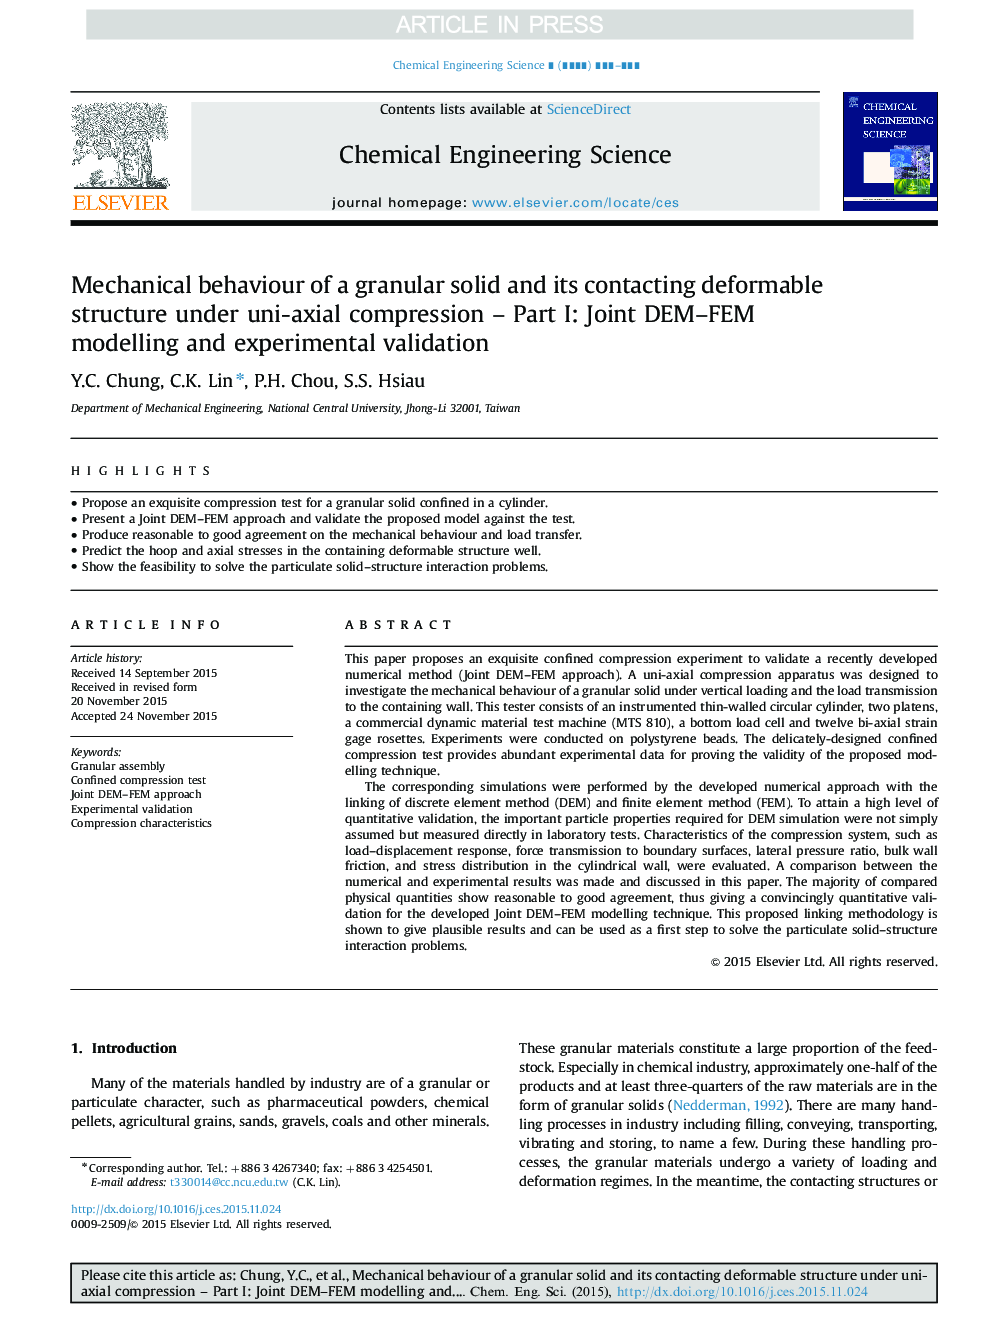 Mechanical behaviour of a granular solid and its contacting deformable structure under uni-axial compression - Part I: Joint DEM-FEM modelling and experimental validation